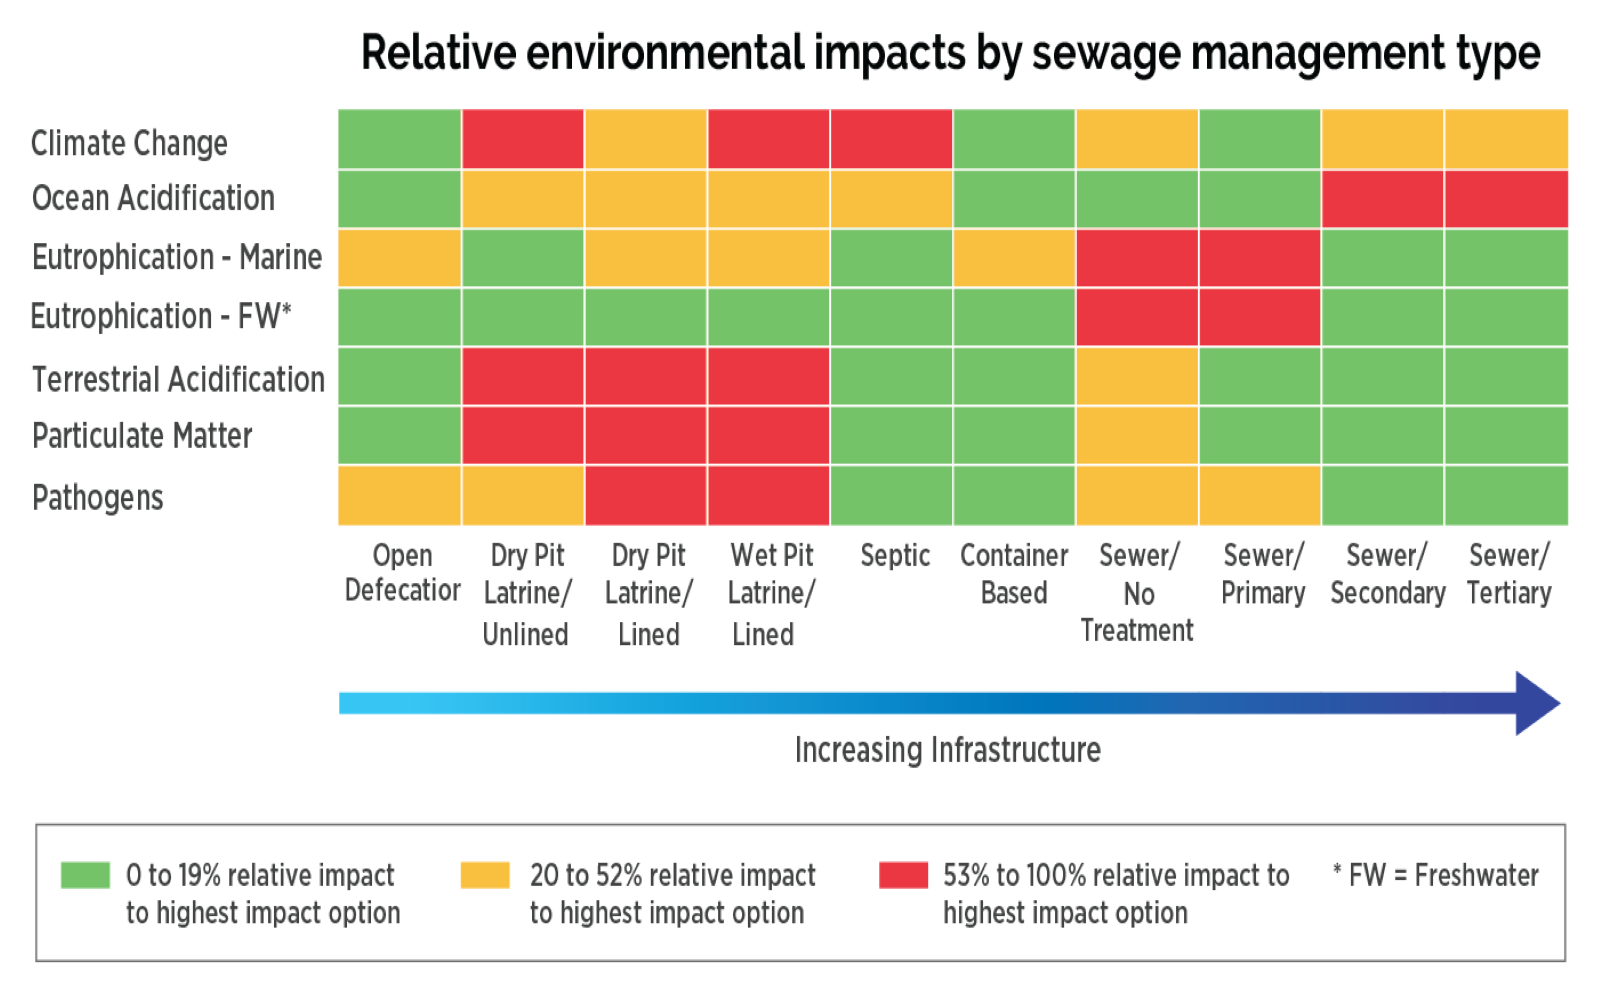 A colorful chart about relative environmental impacts by sewage management type, showing that different management types have different impacts on areas such as climate change, ocean acidification, eutrophication (Marine), eutrophication (FW), Terrestrial acidification, particulate matter, and pathogens.